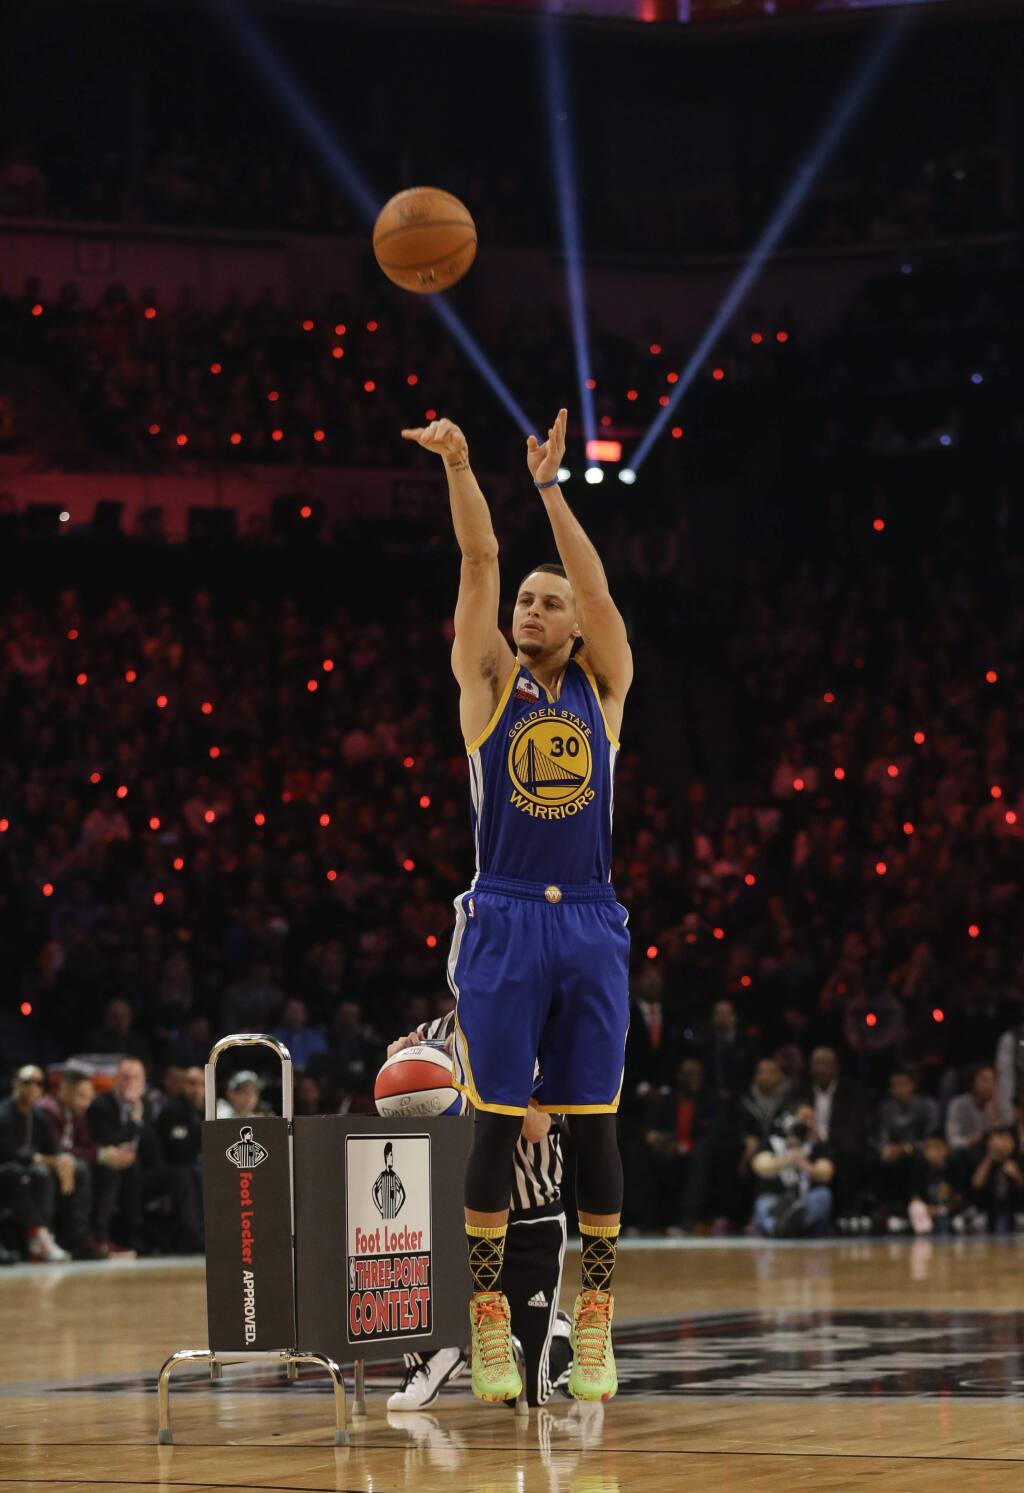 Warriors' Steph Curry captures NBA's 3-point contest on All-Star weekend  (w/video)